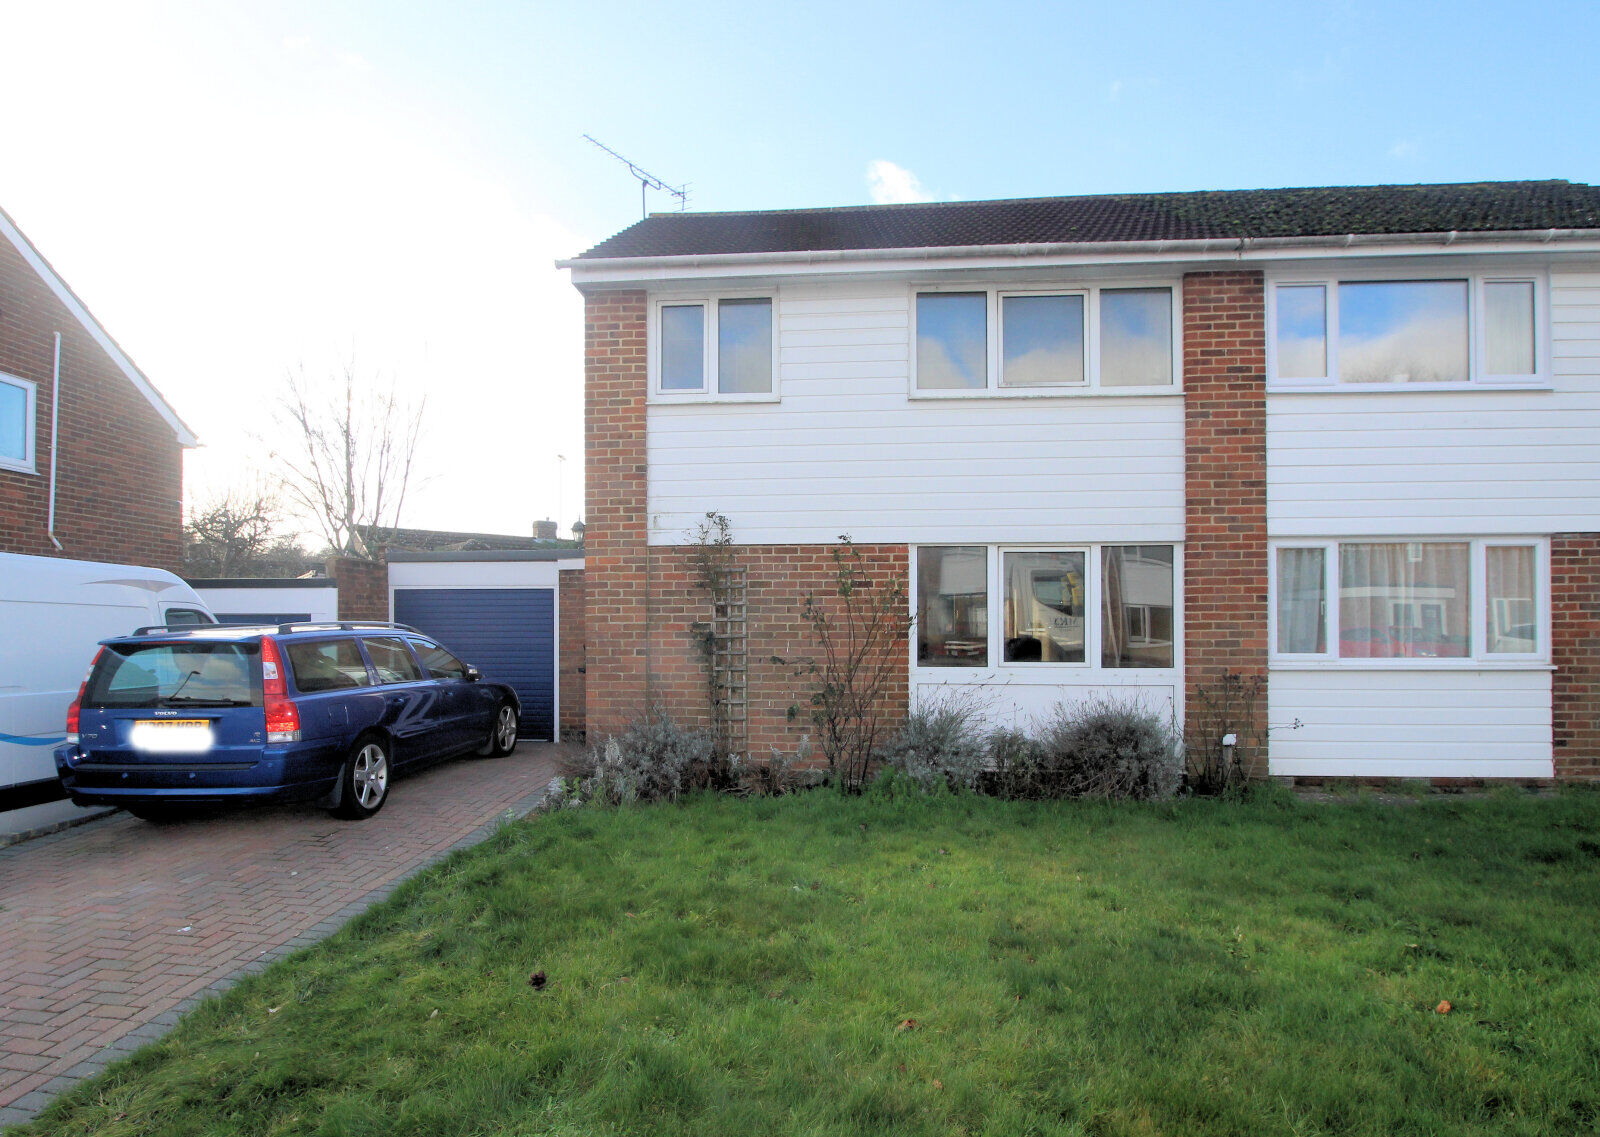 3 bedroom semi detached house for sale Lea Road, Sonning Common, RG4, main image